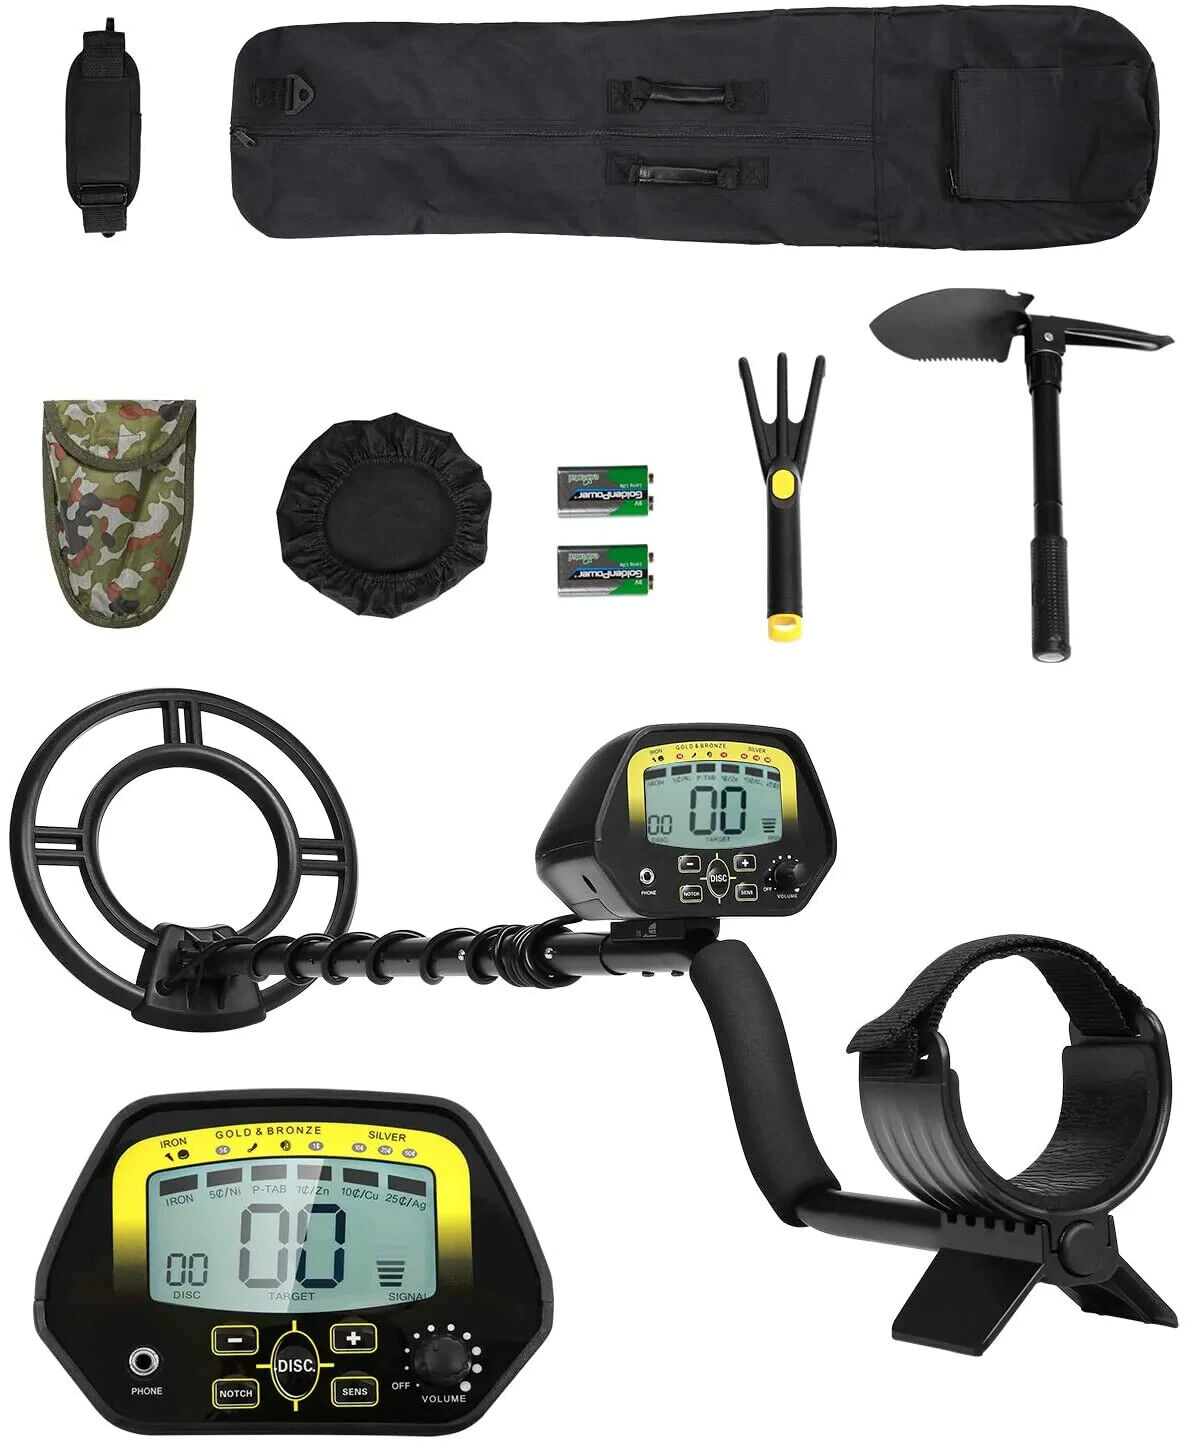 High Accuracy Metal Detector Kit W/Backlight LCD Display Waterproof Search Coil